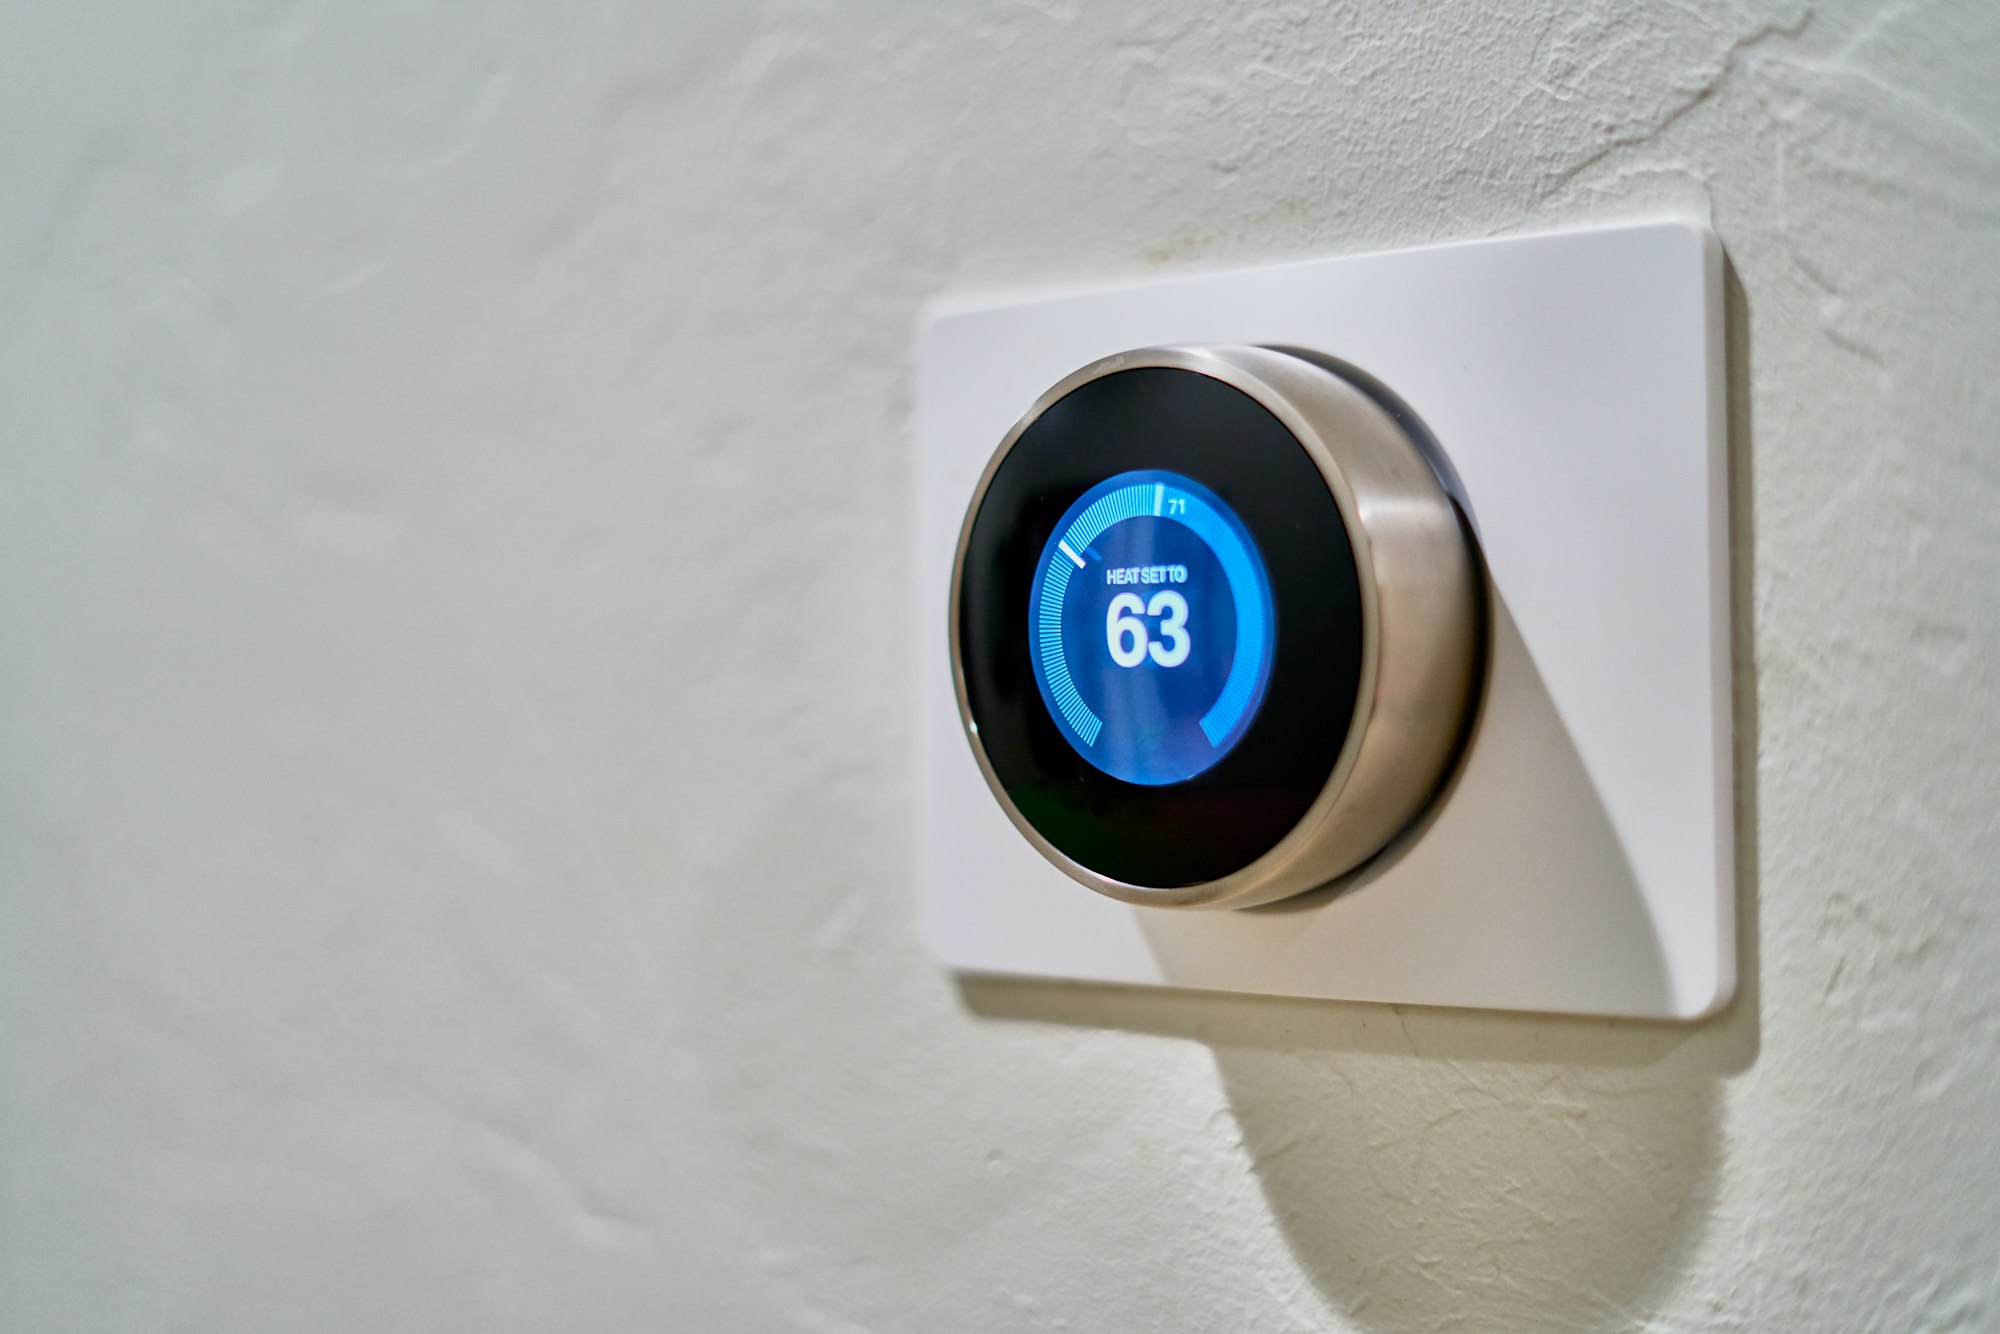 Expert says IoT and smart home devices are "very safe because they barely work anyway"